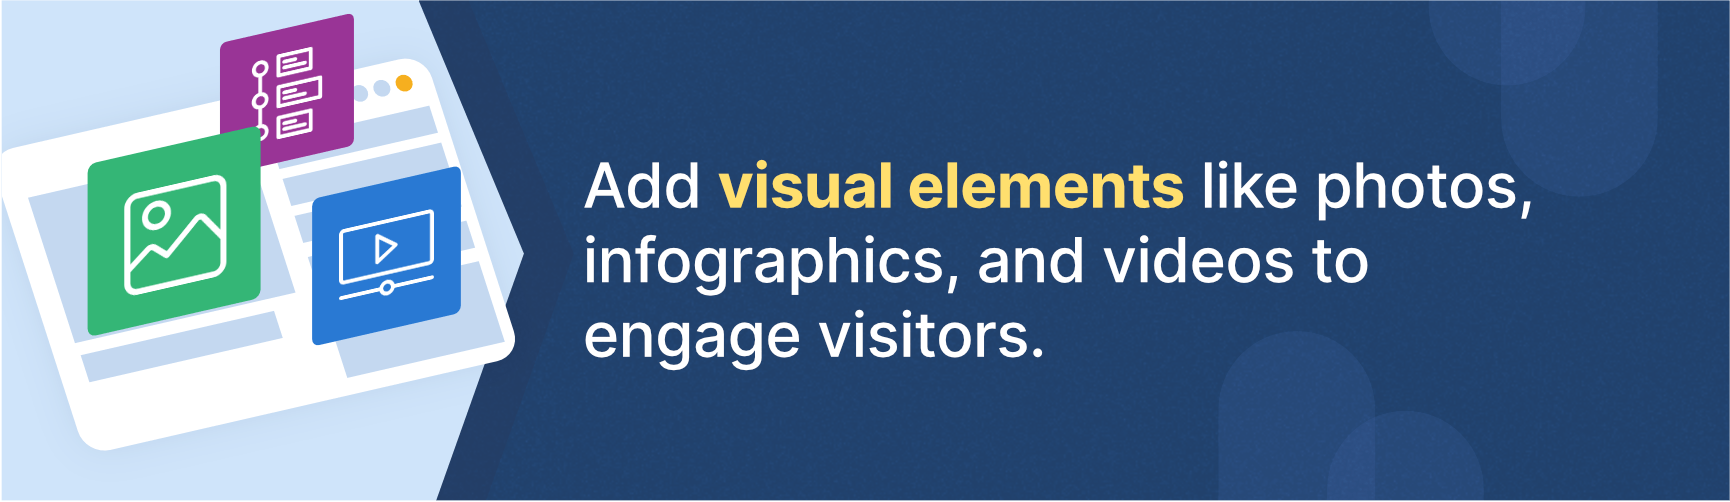 Redesign a site and engage visitors with visual elements like photos and videos